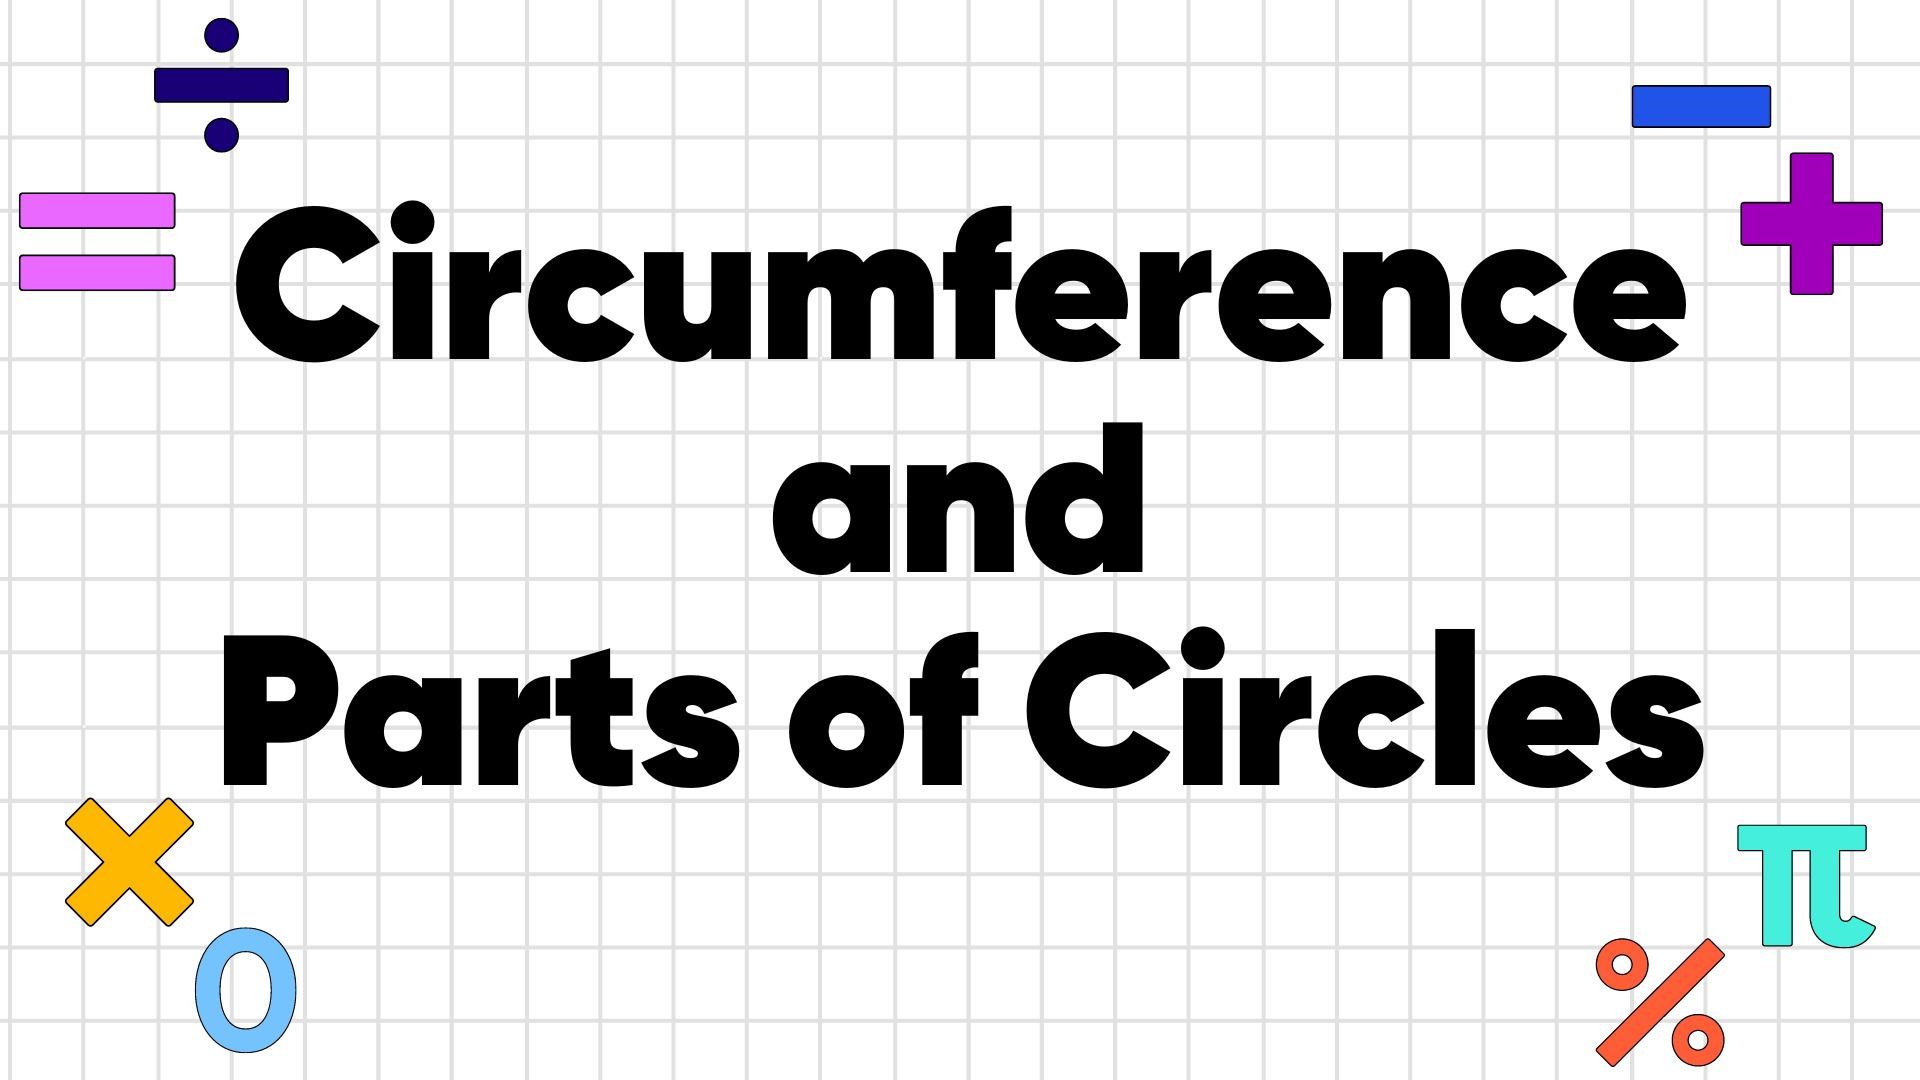 How to Find the Circumference and Identify Parts of a Circle